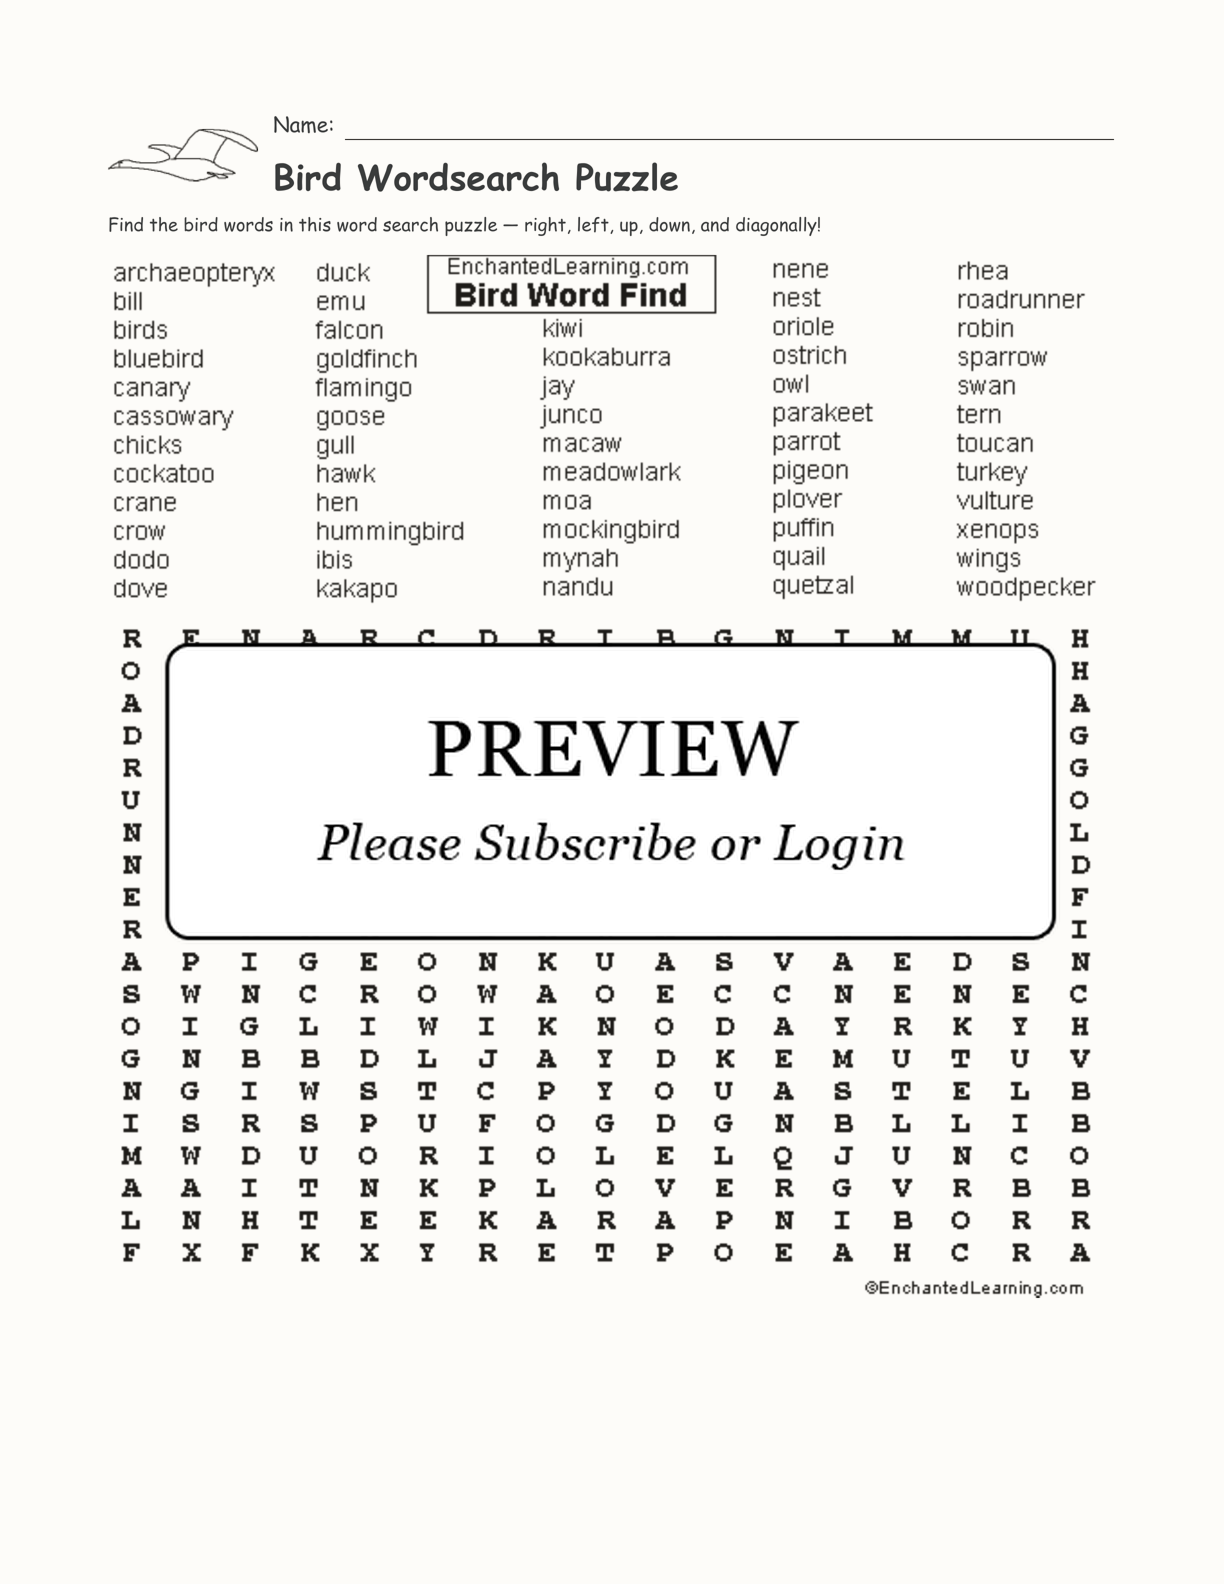 Bird Wordsearch Puzzle interactive worksheet page 1